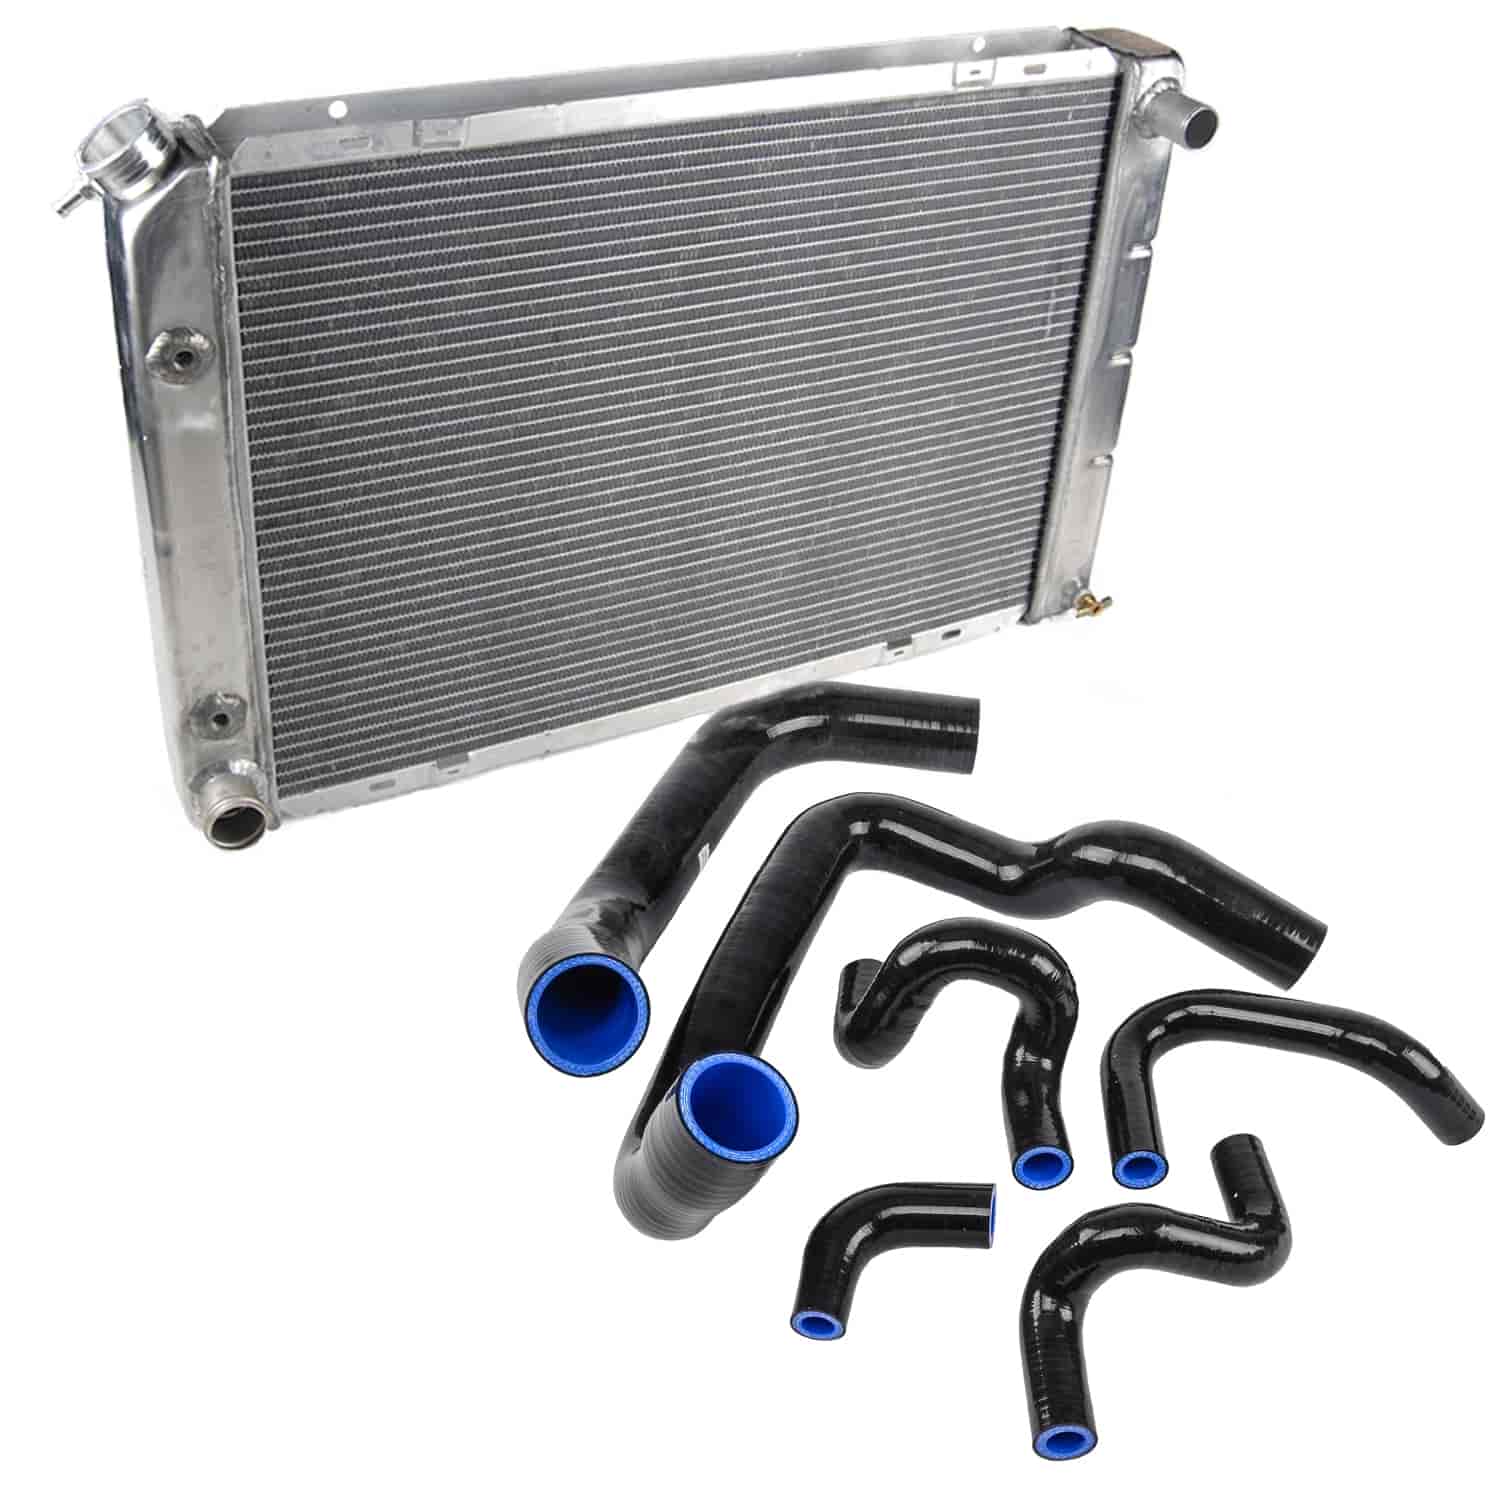 Black Silicone Hose and Radiator Kit for 1986-1993 5.0 Mustang